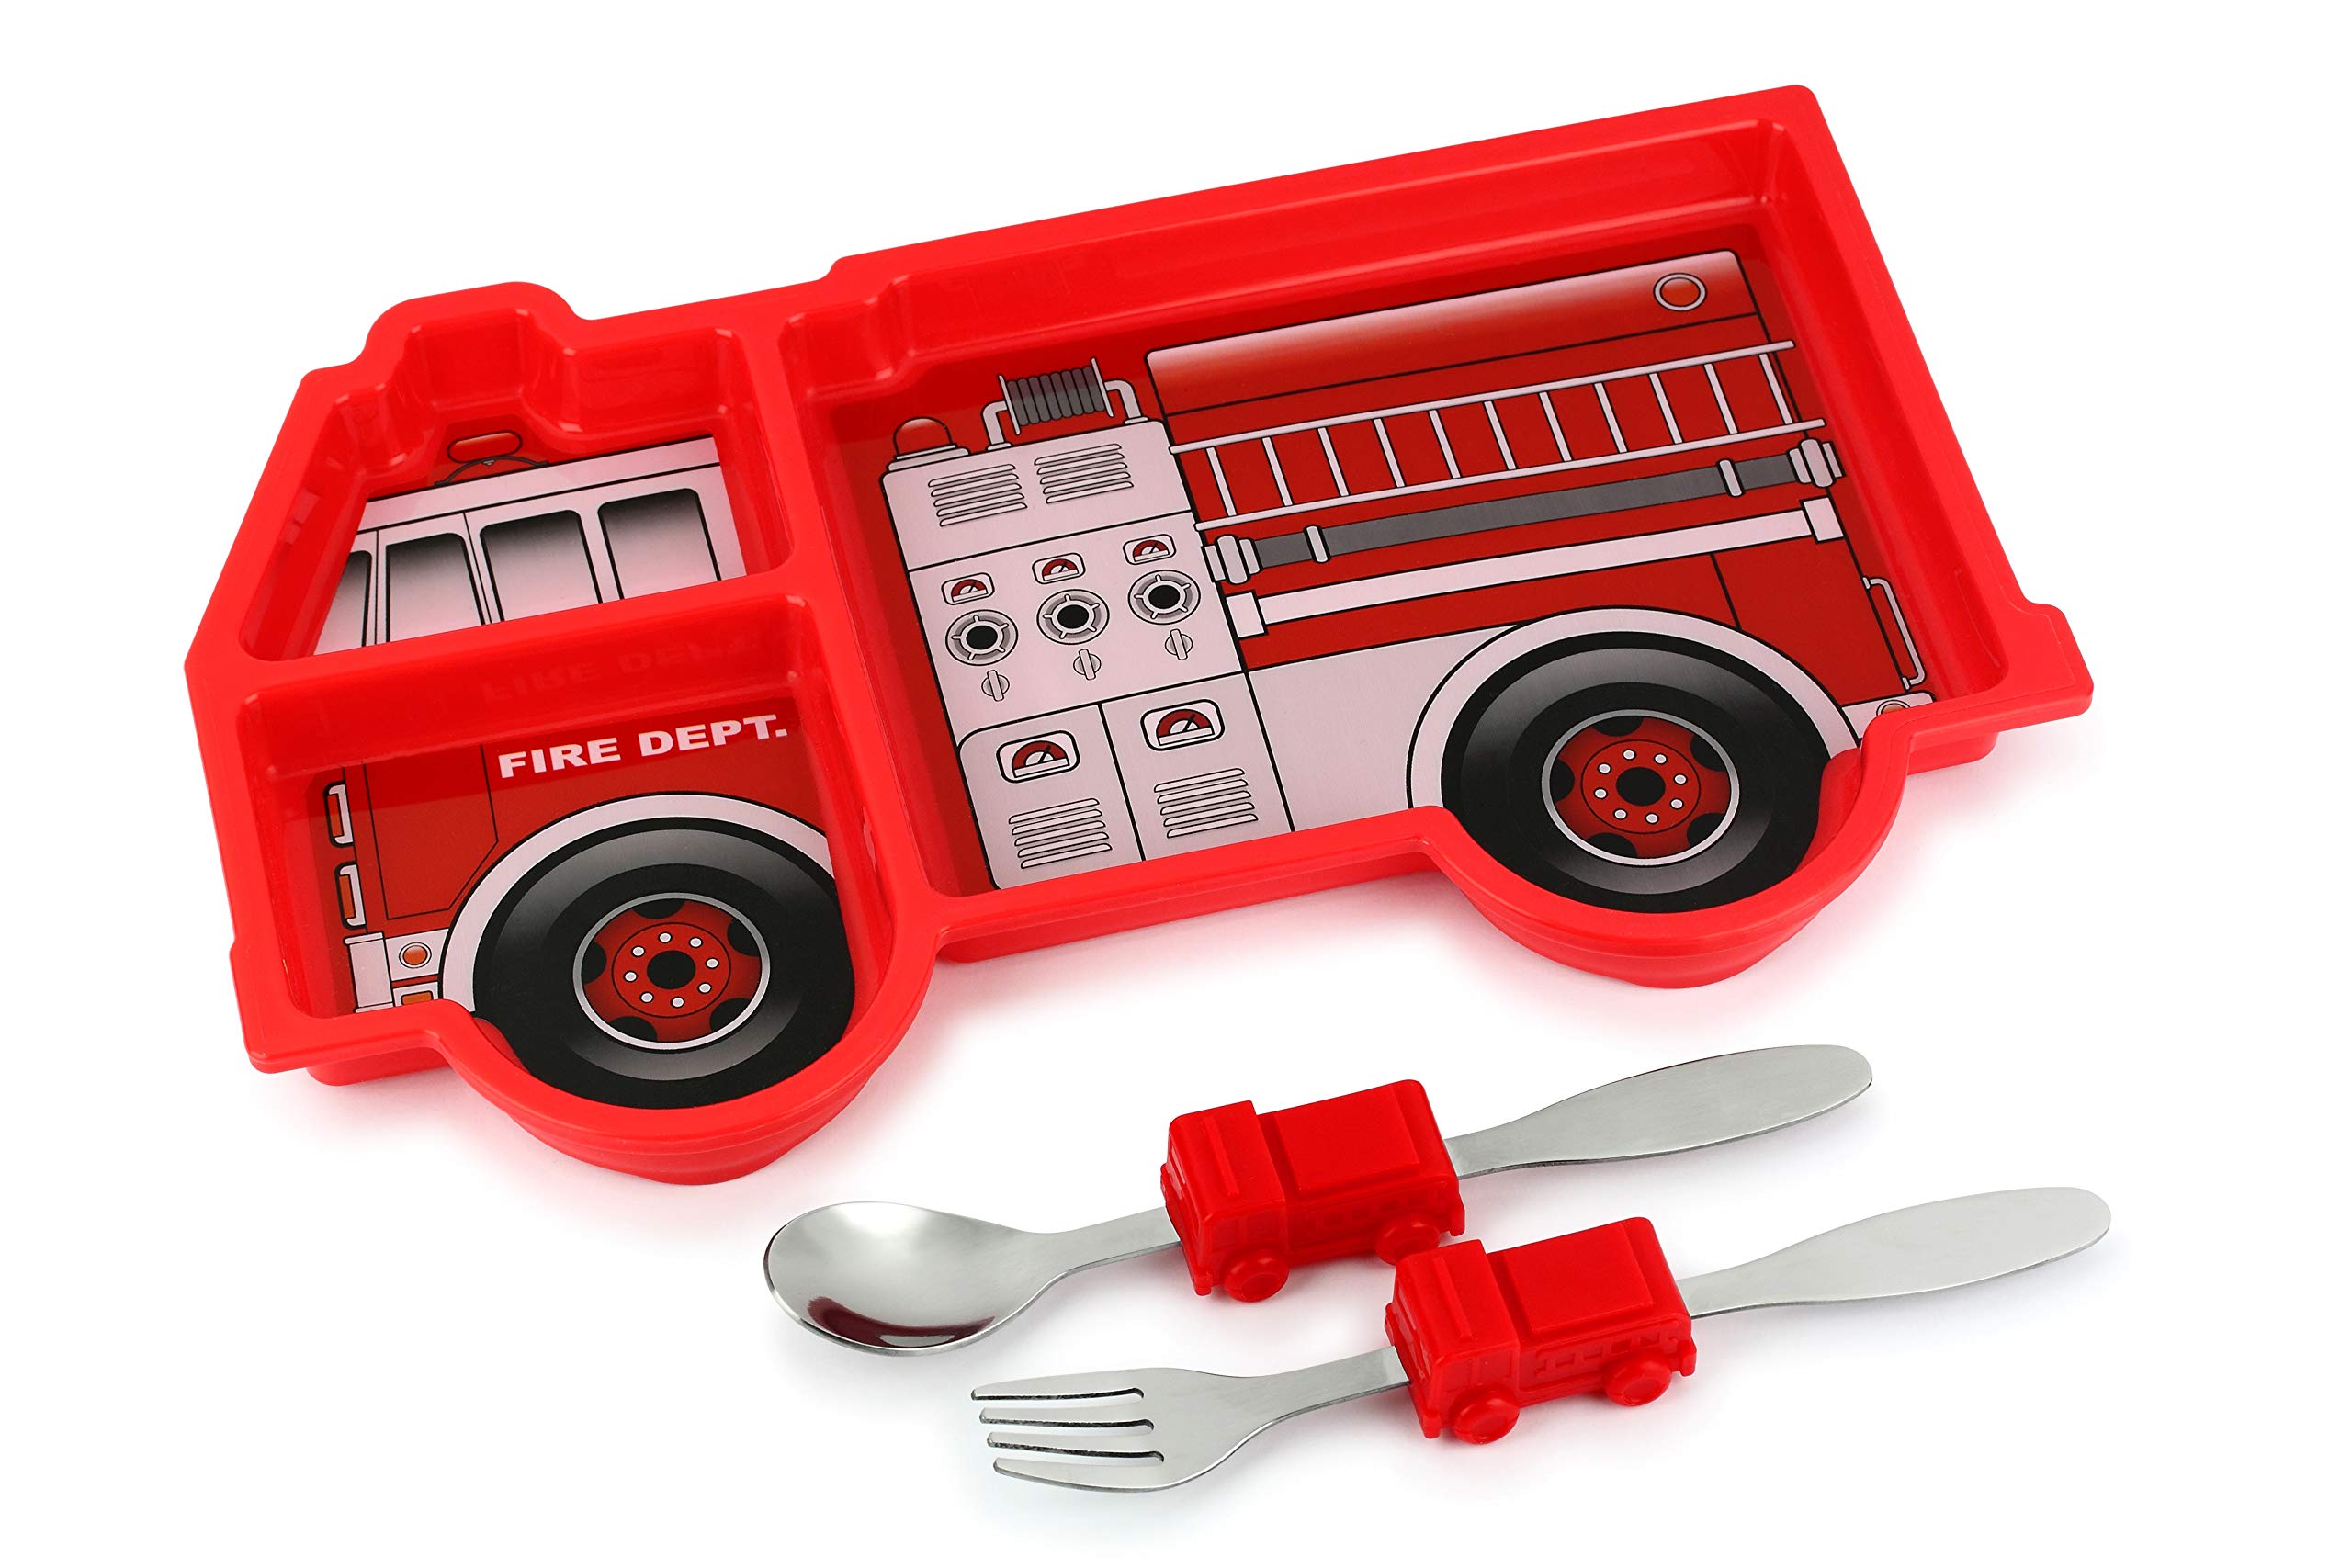 Book Cover Kids Divided Plate with Utensils - Children's Meal Set with Plate, Fork and Spoon - Fire Engine Red